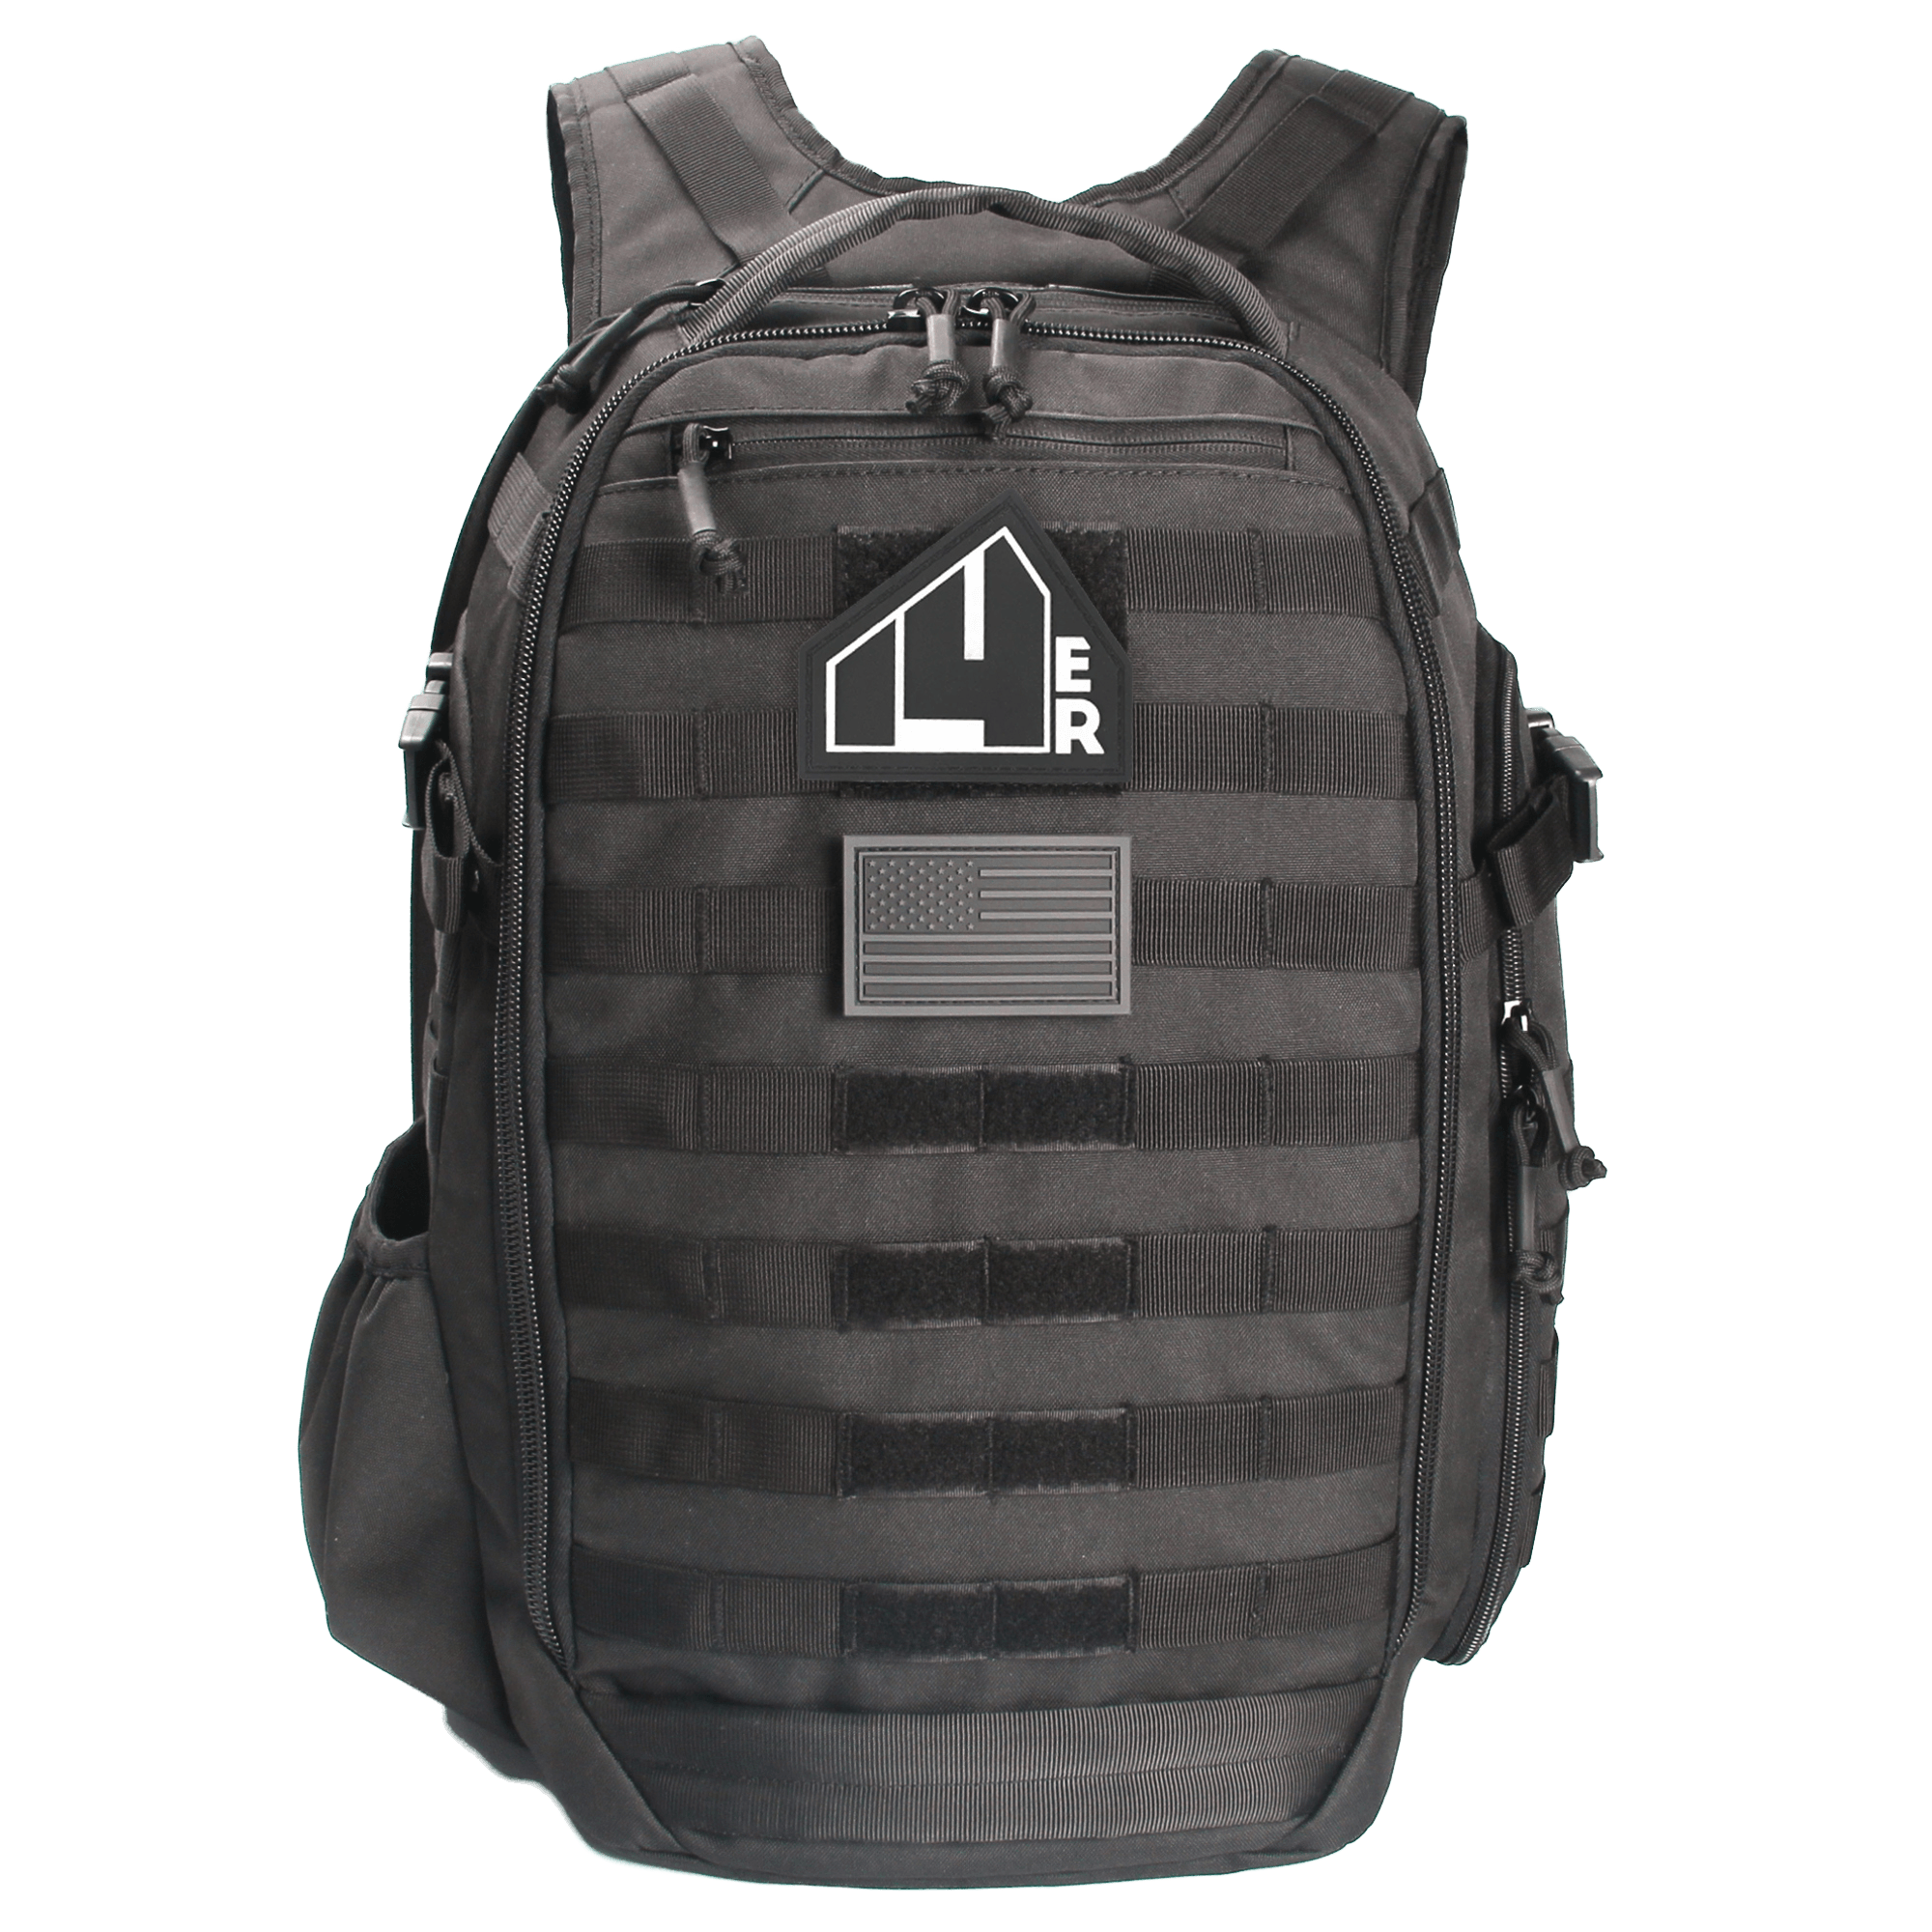 Choosing a Tactical Backpack - All you need to know and more